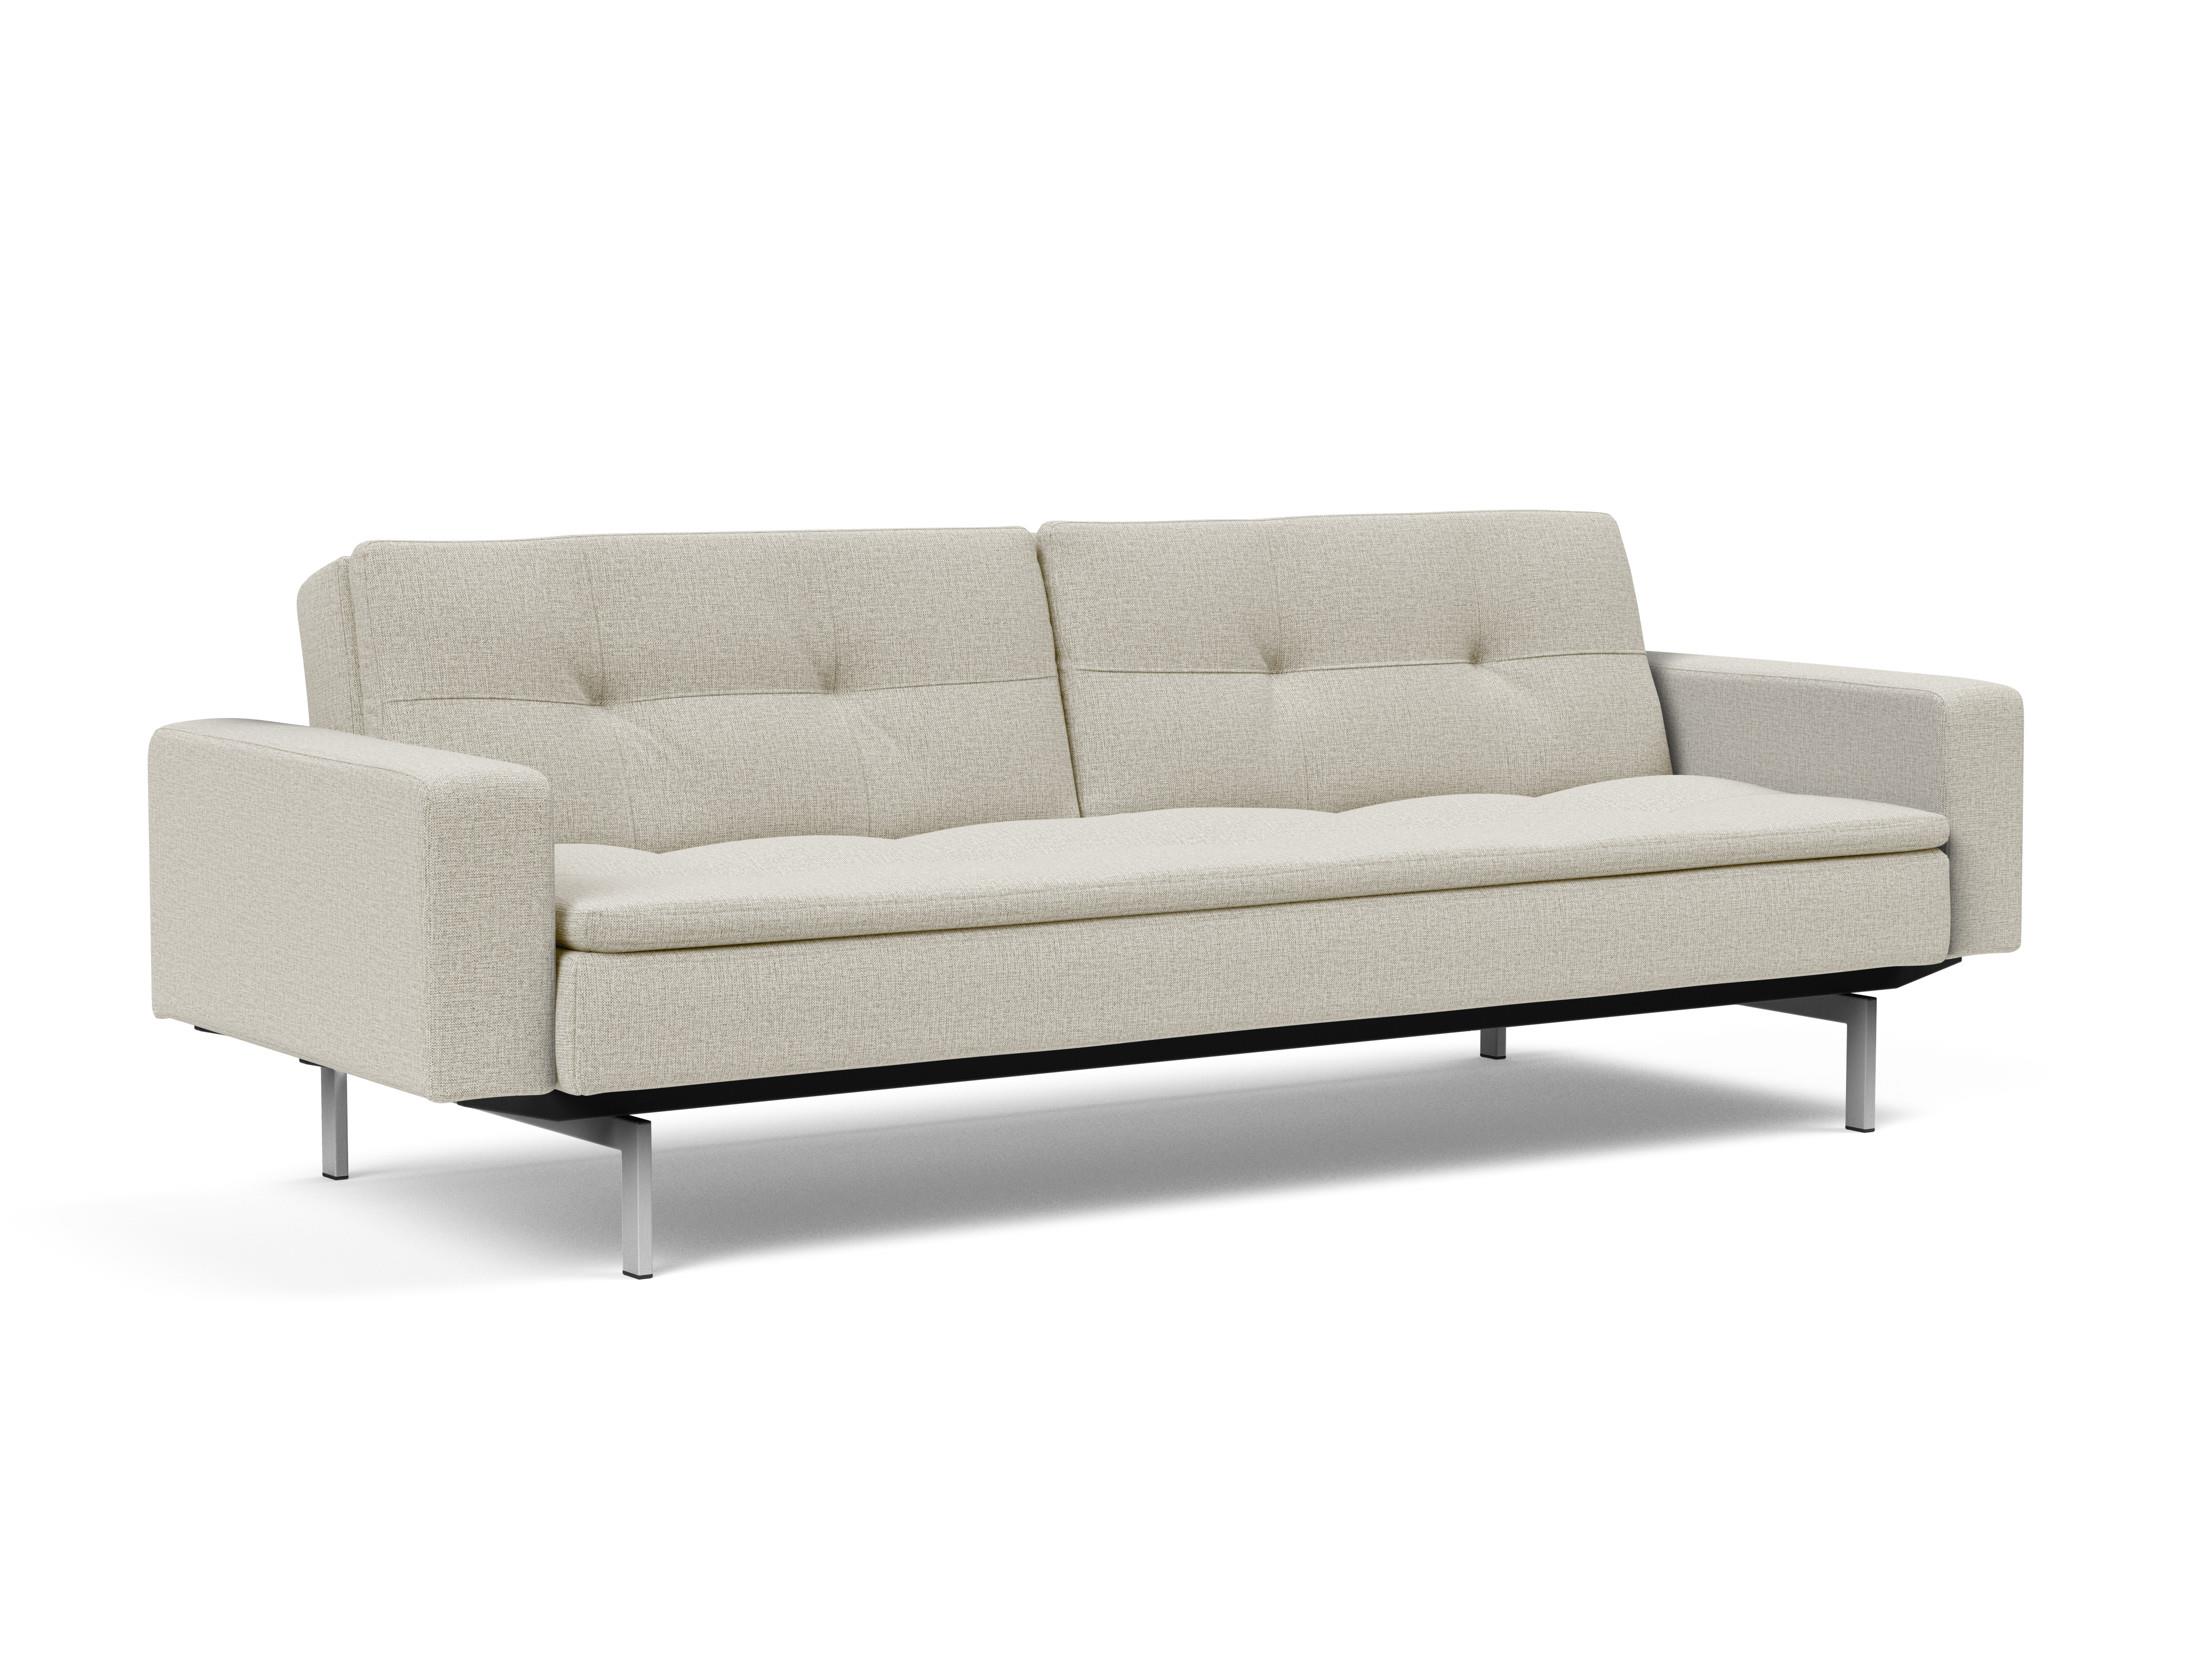 Dublexo-Stainless-Steel-Sofa-Bed-With-Arms-527-p2-web